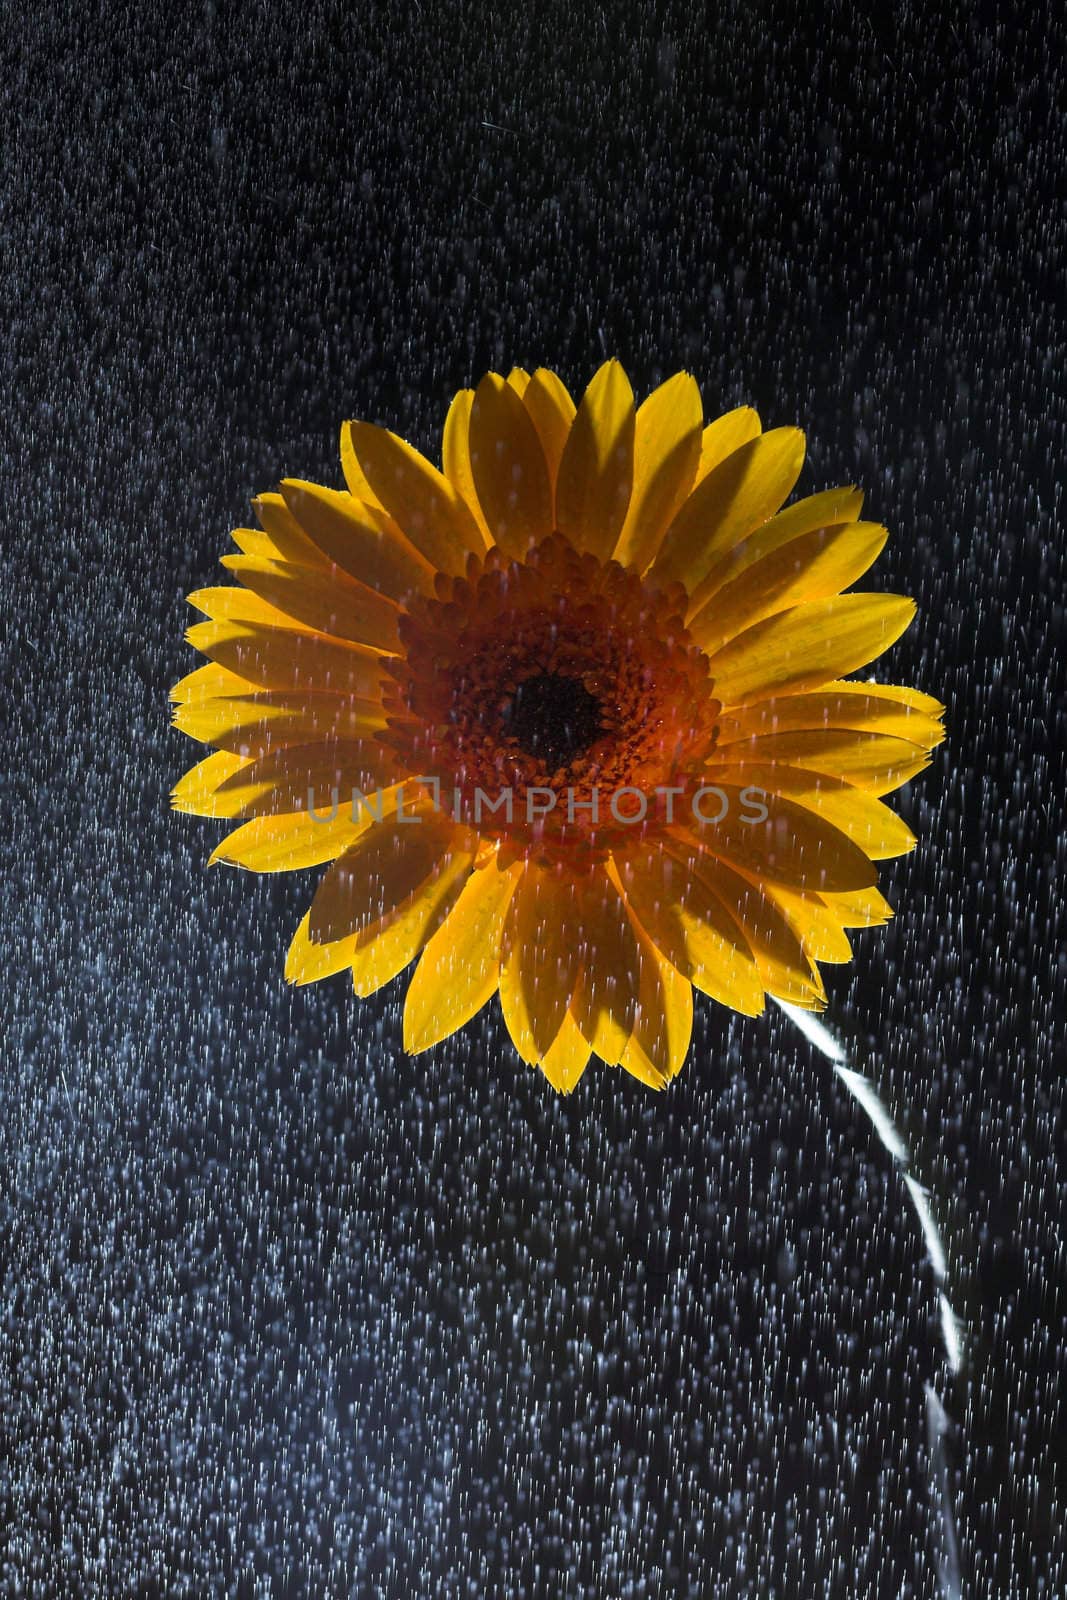 macro of a gerber daisy with water droplets on the petals